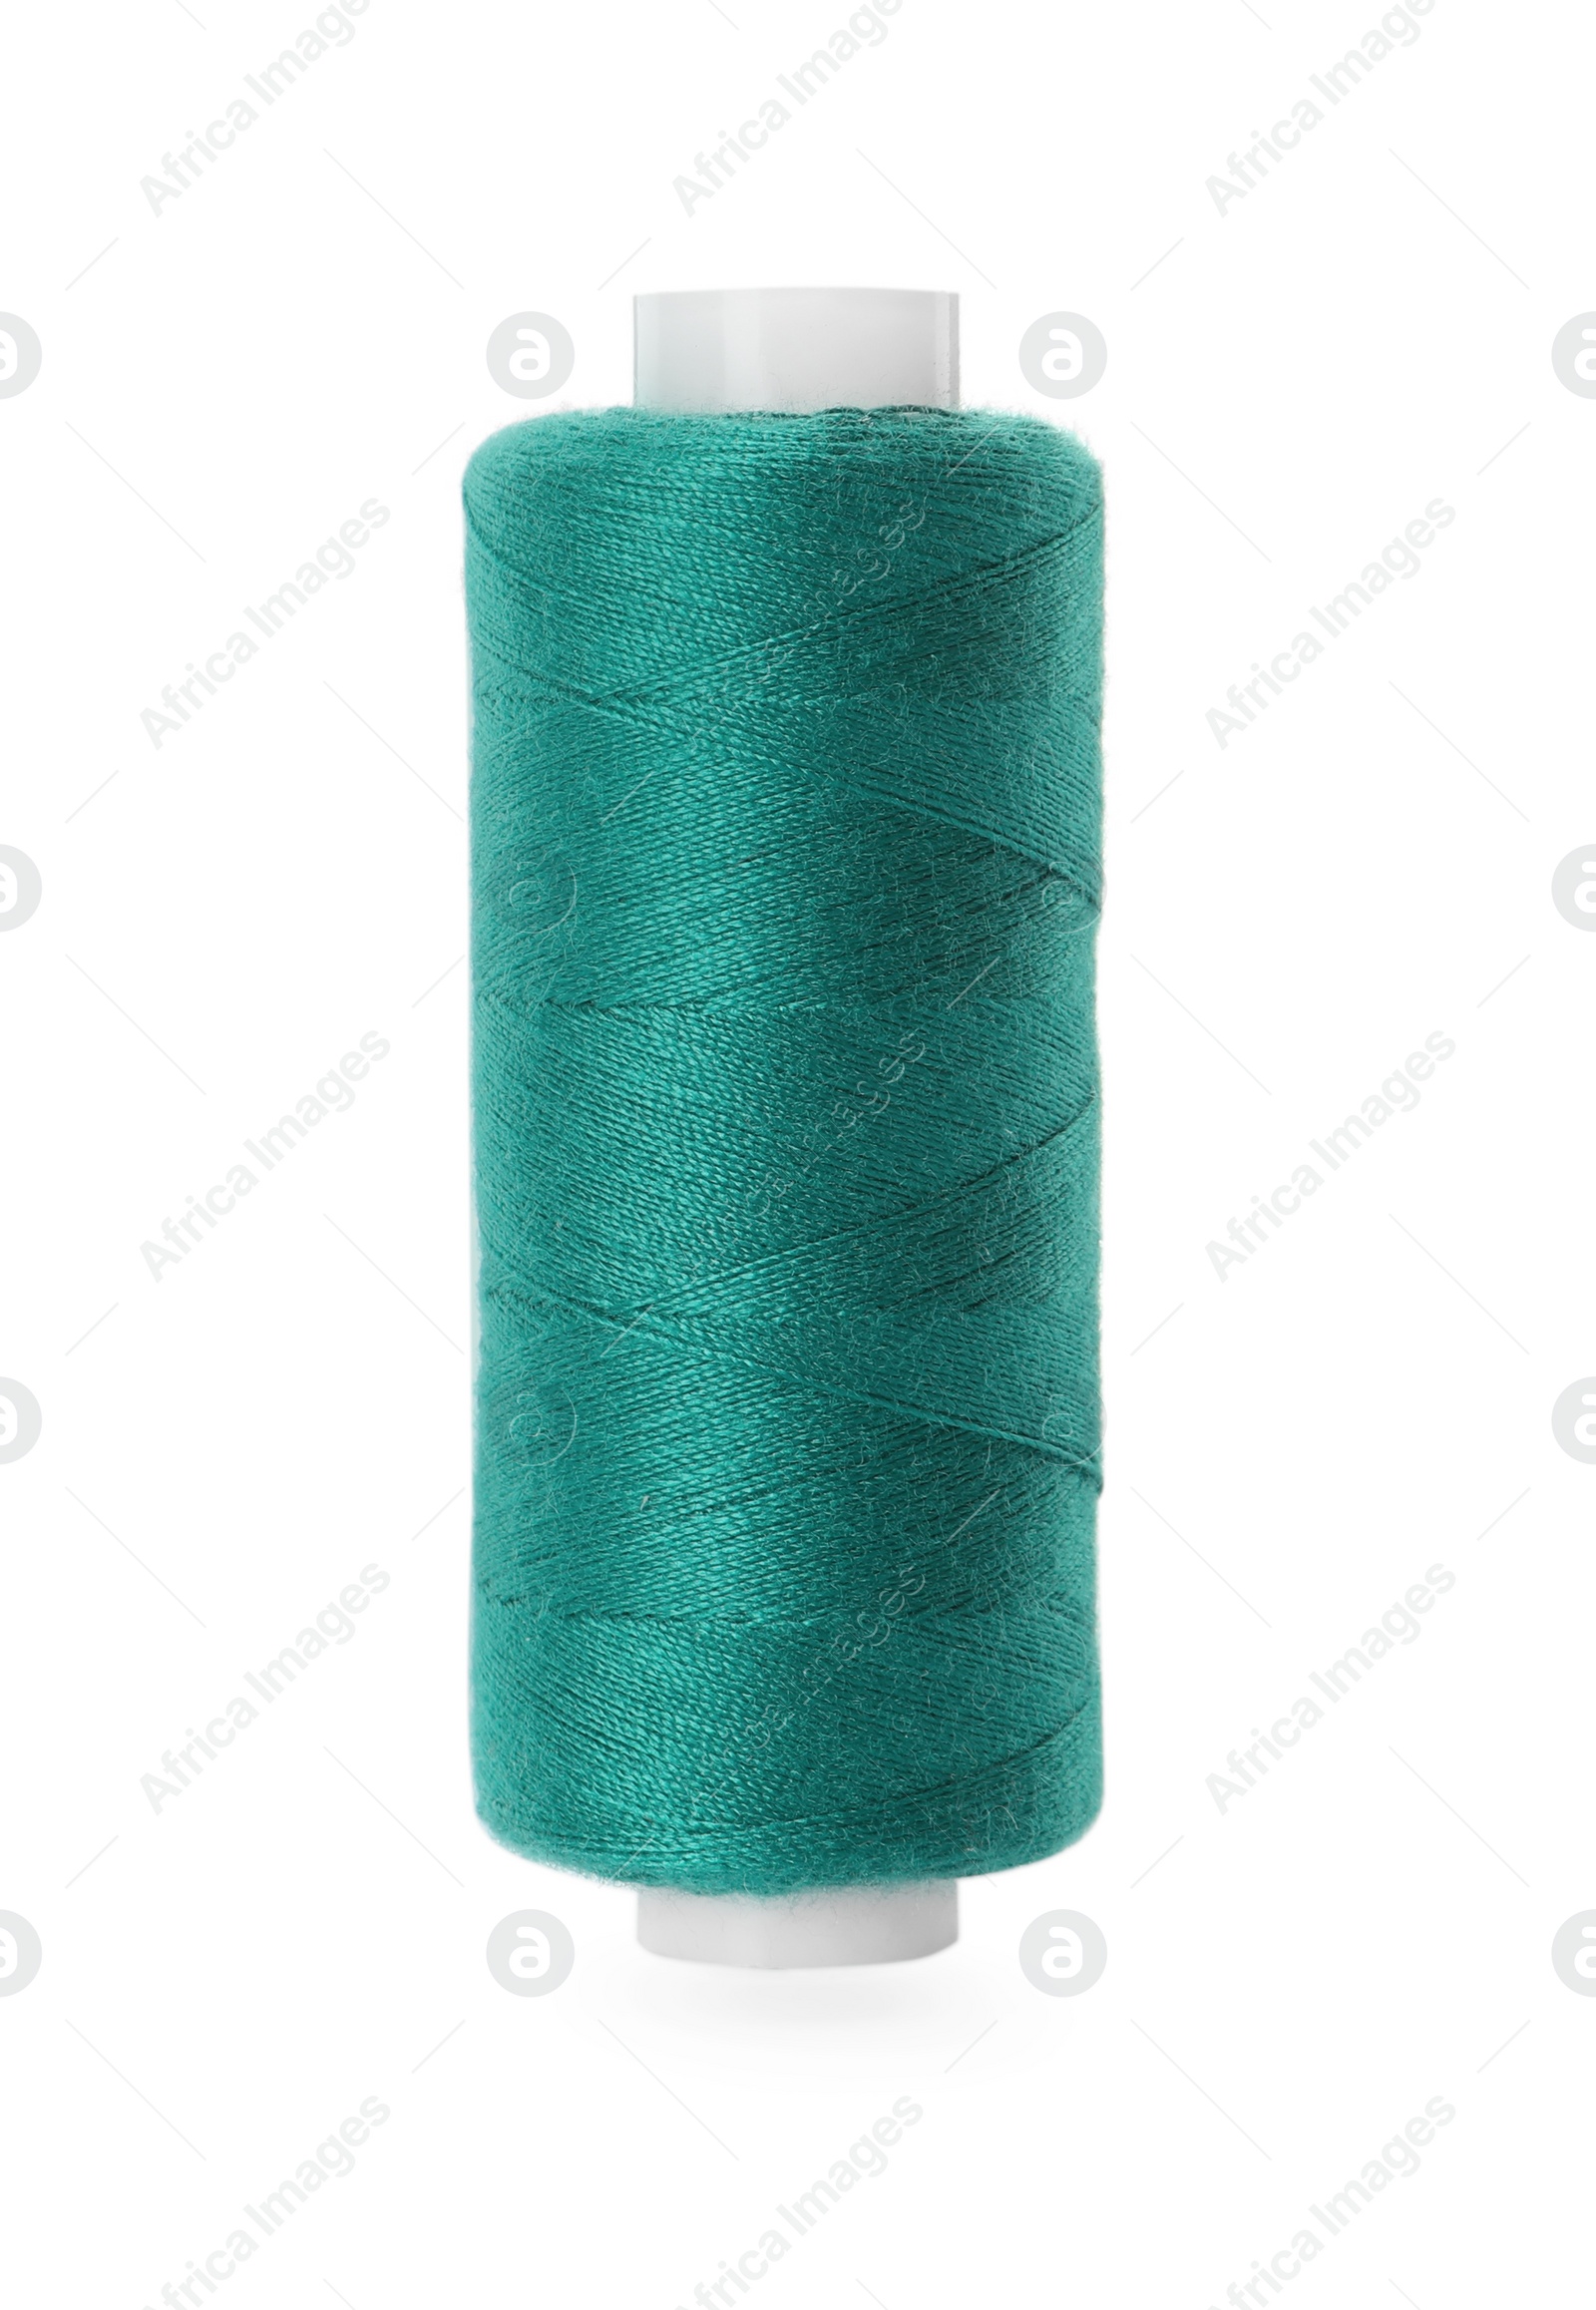 Photo of Spool of green sewing thread isolated on white